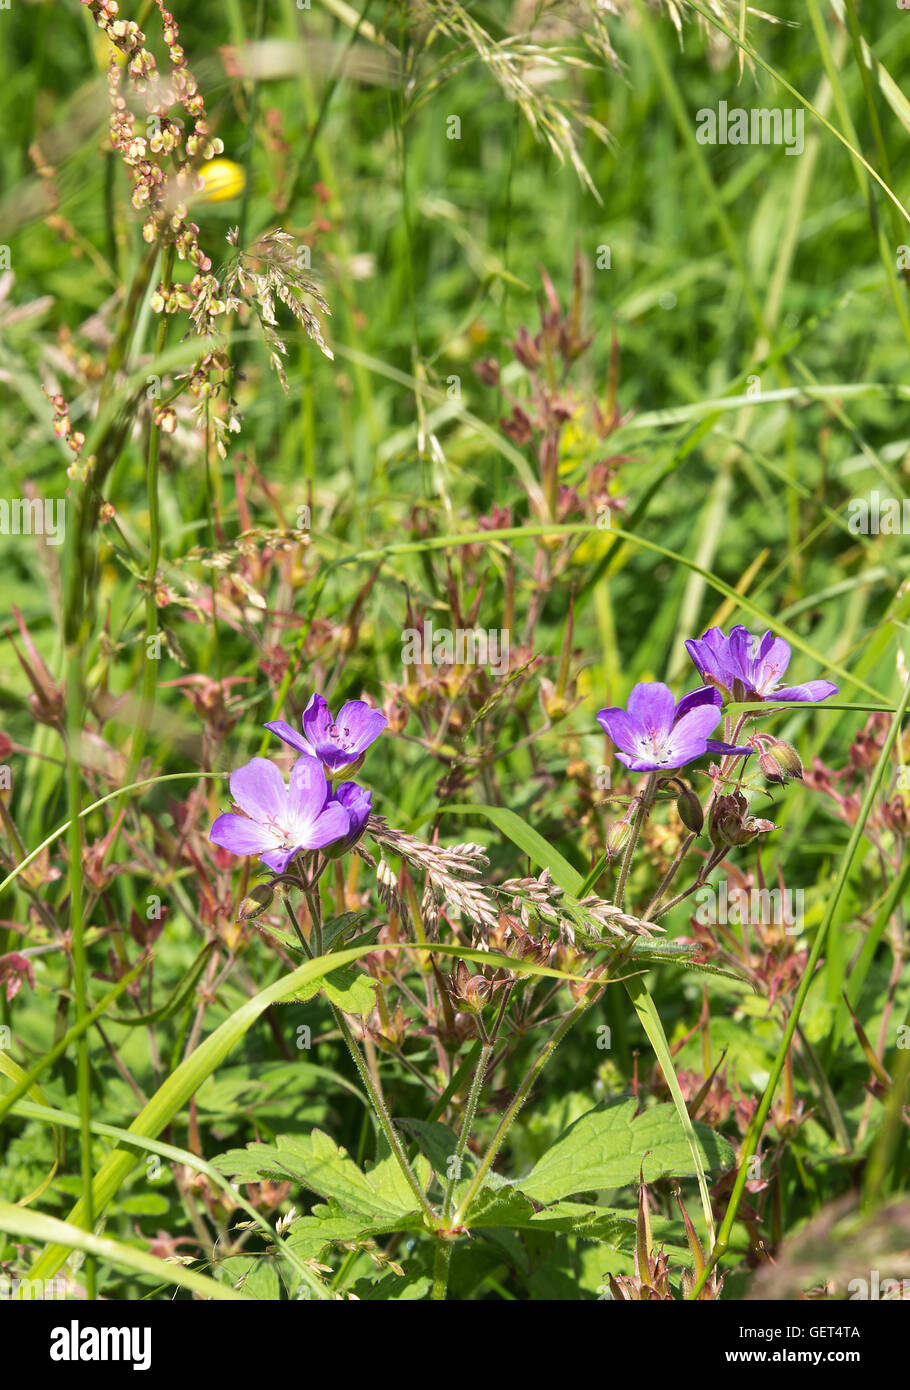 Blue Meadow Cranesbill Flowers in the Countryside near Penyghent Fell Yorkshire Dales National Park England United Kingdom UK Stock Photo